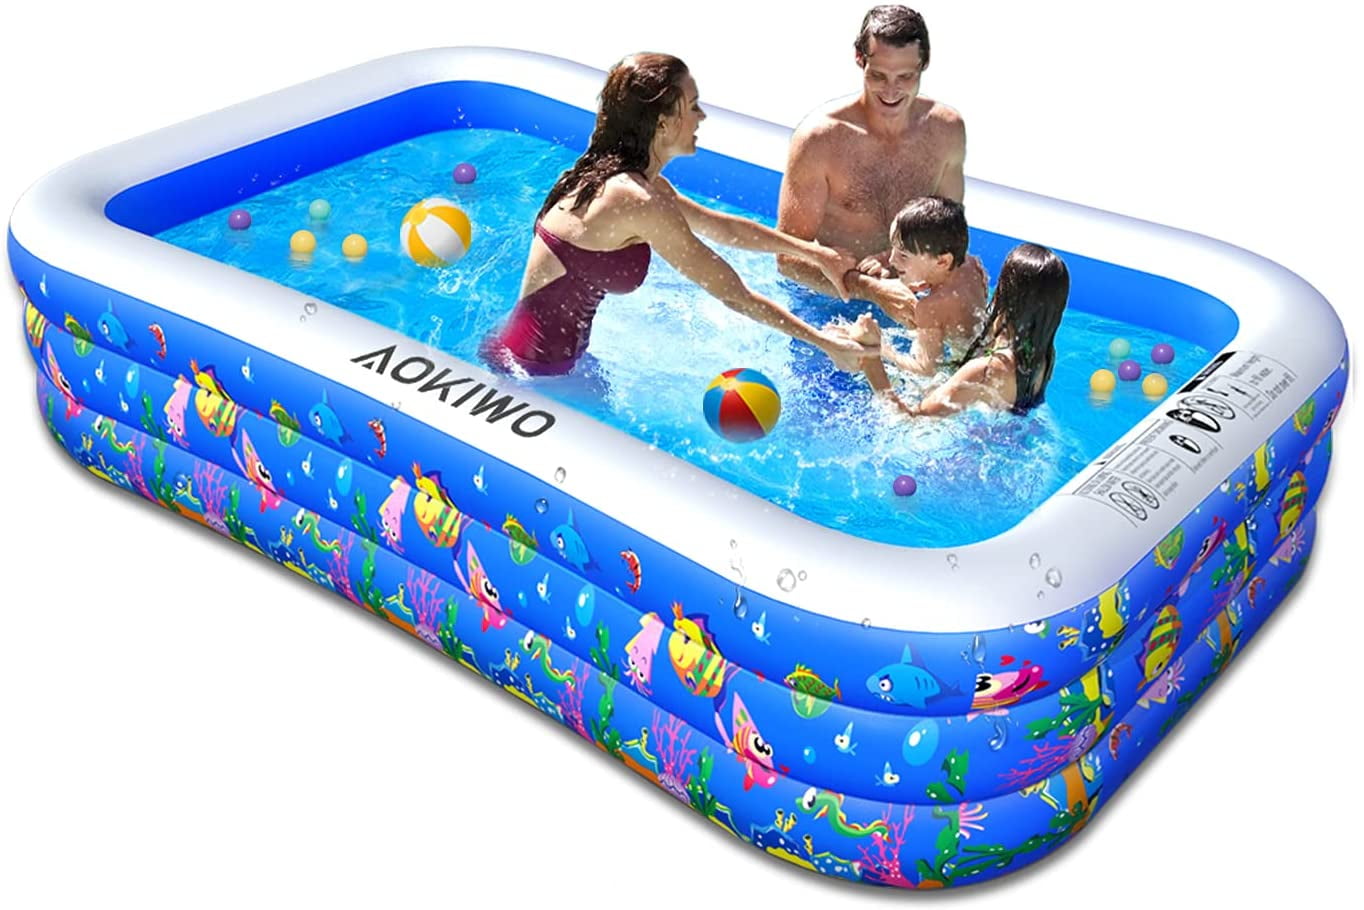 Family Full-Sized Pool ， Family Inflatable Swimming Pool Thick Lounge Pool Summer Water Party Supply for Baby Kids Adult for Outdoor Garden Backyard 